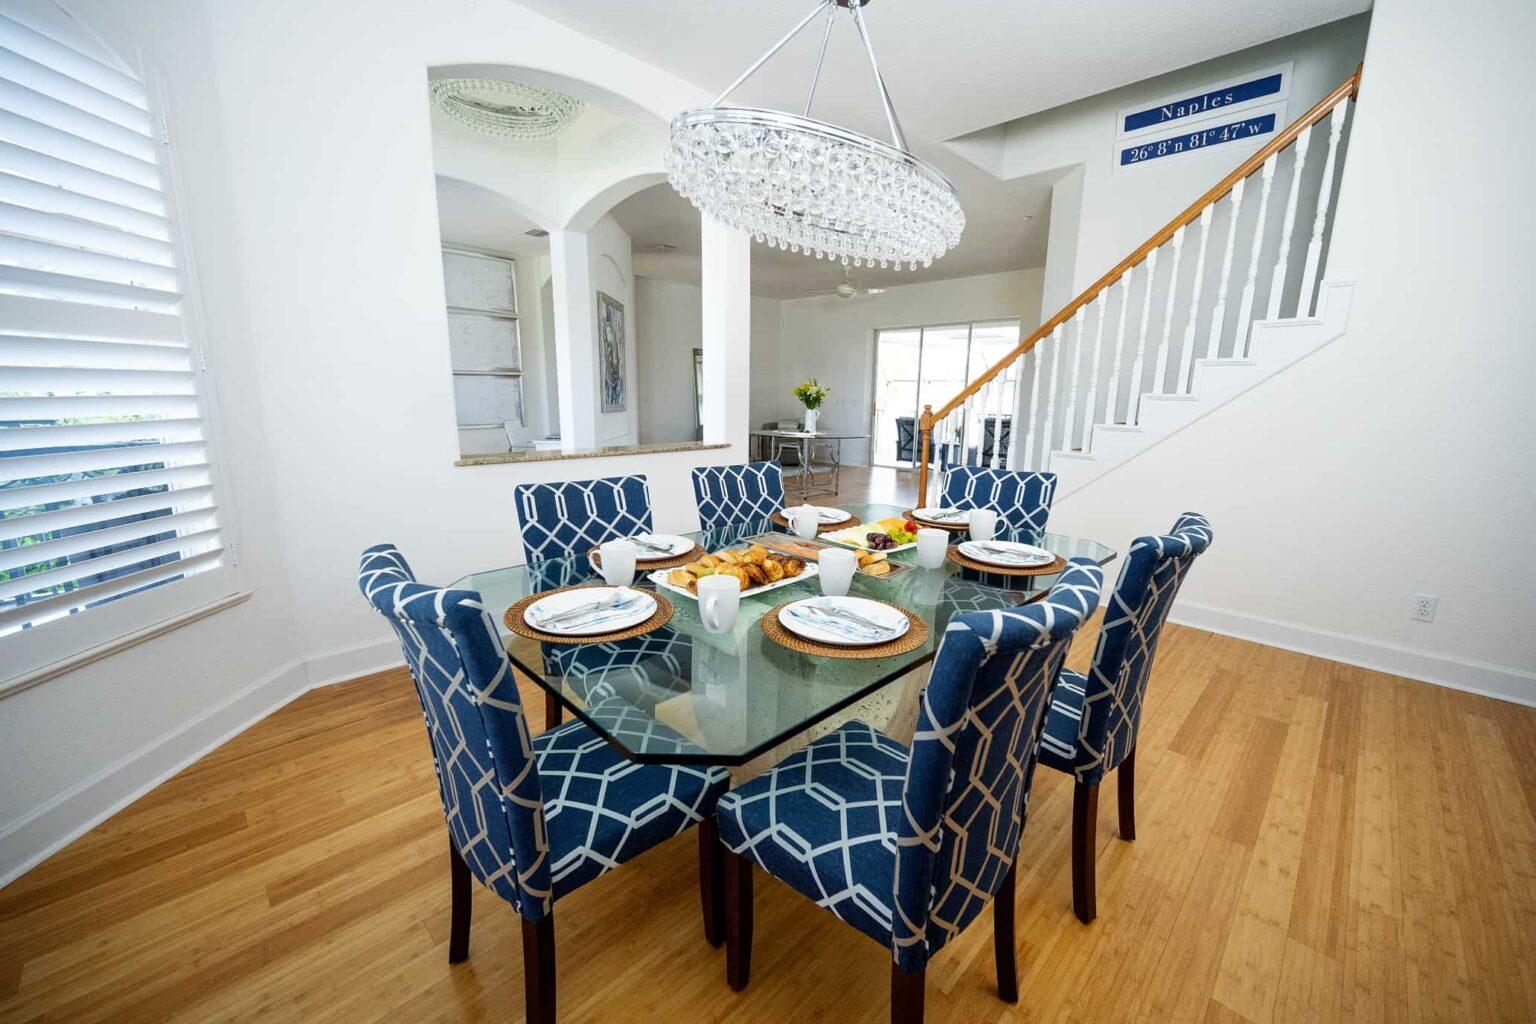 naples fl vacation home Formal dining room - Seats 6.